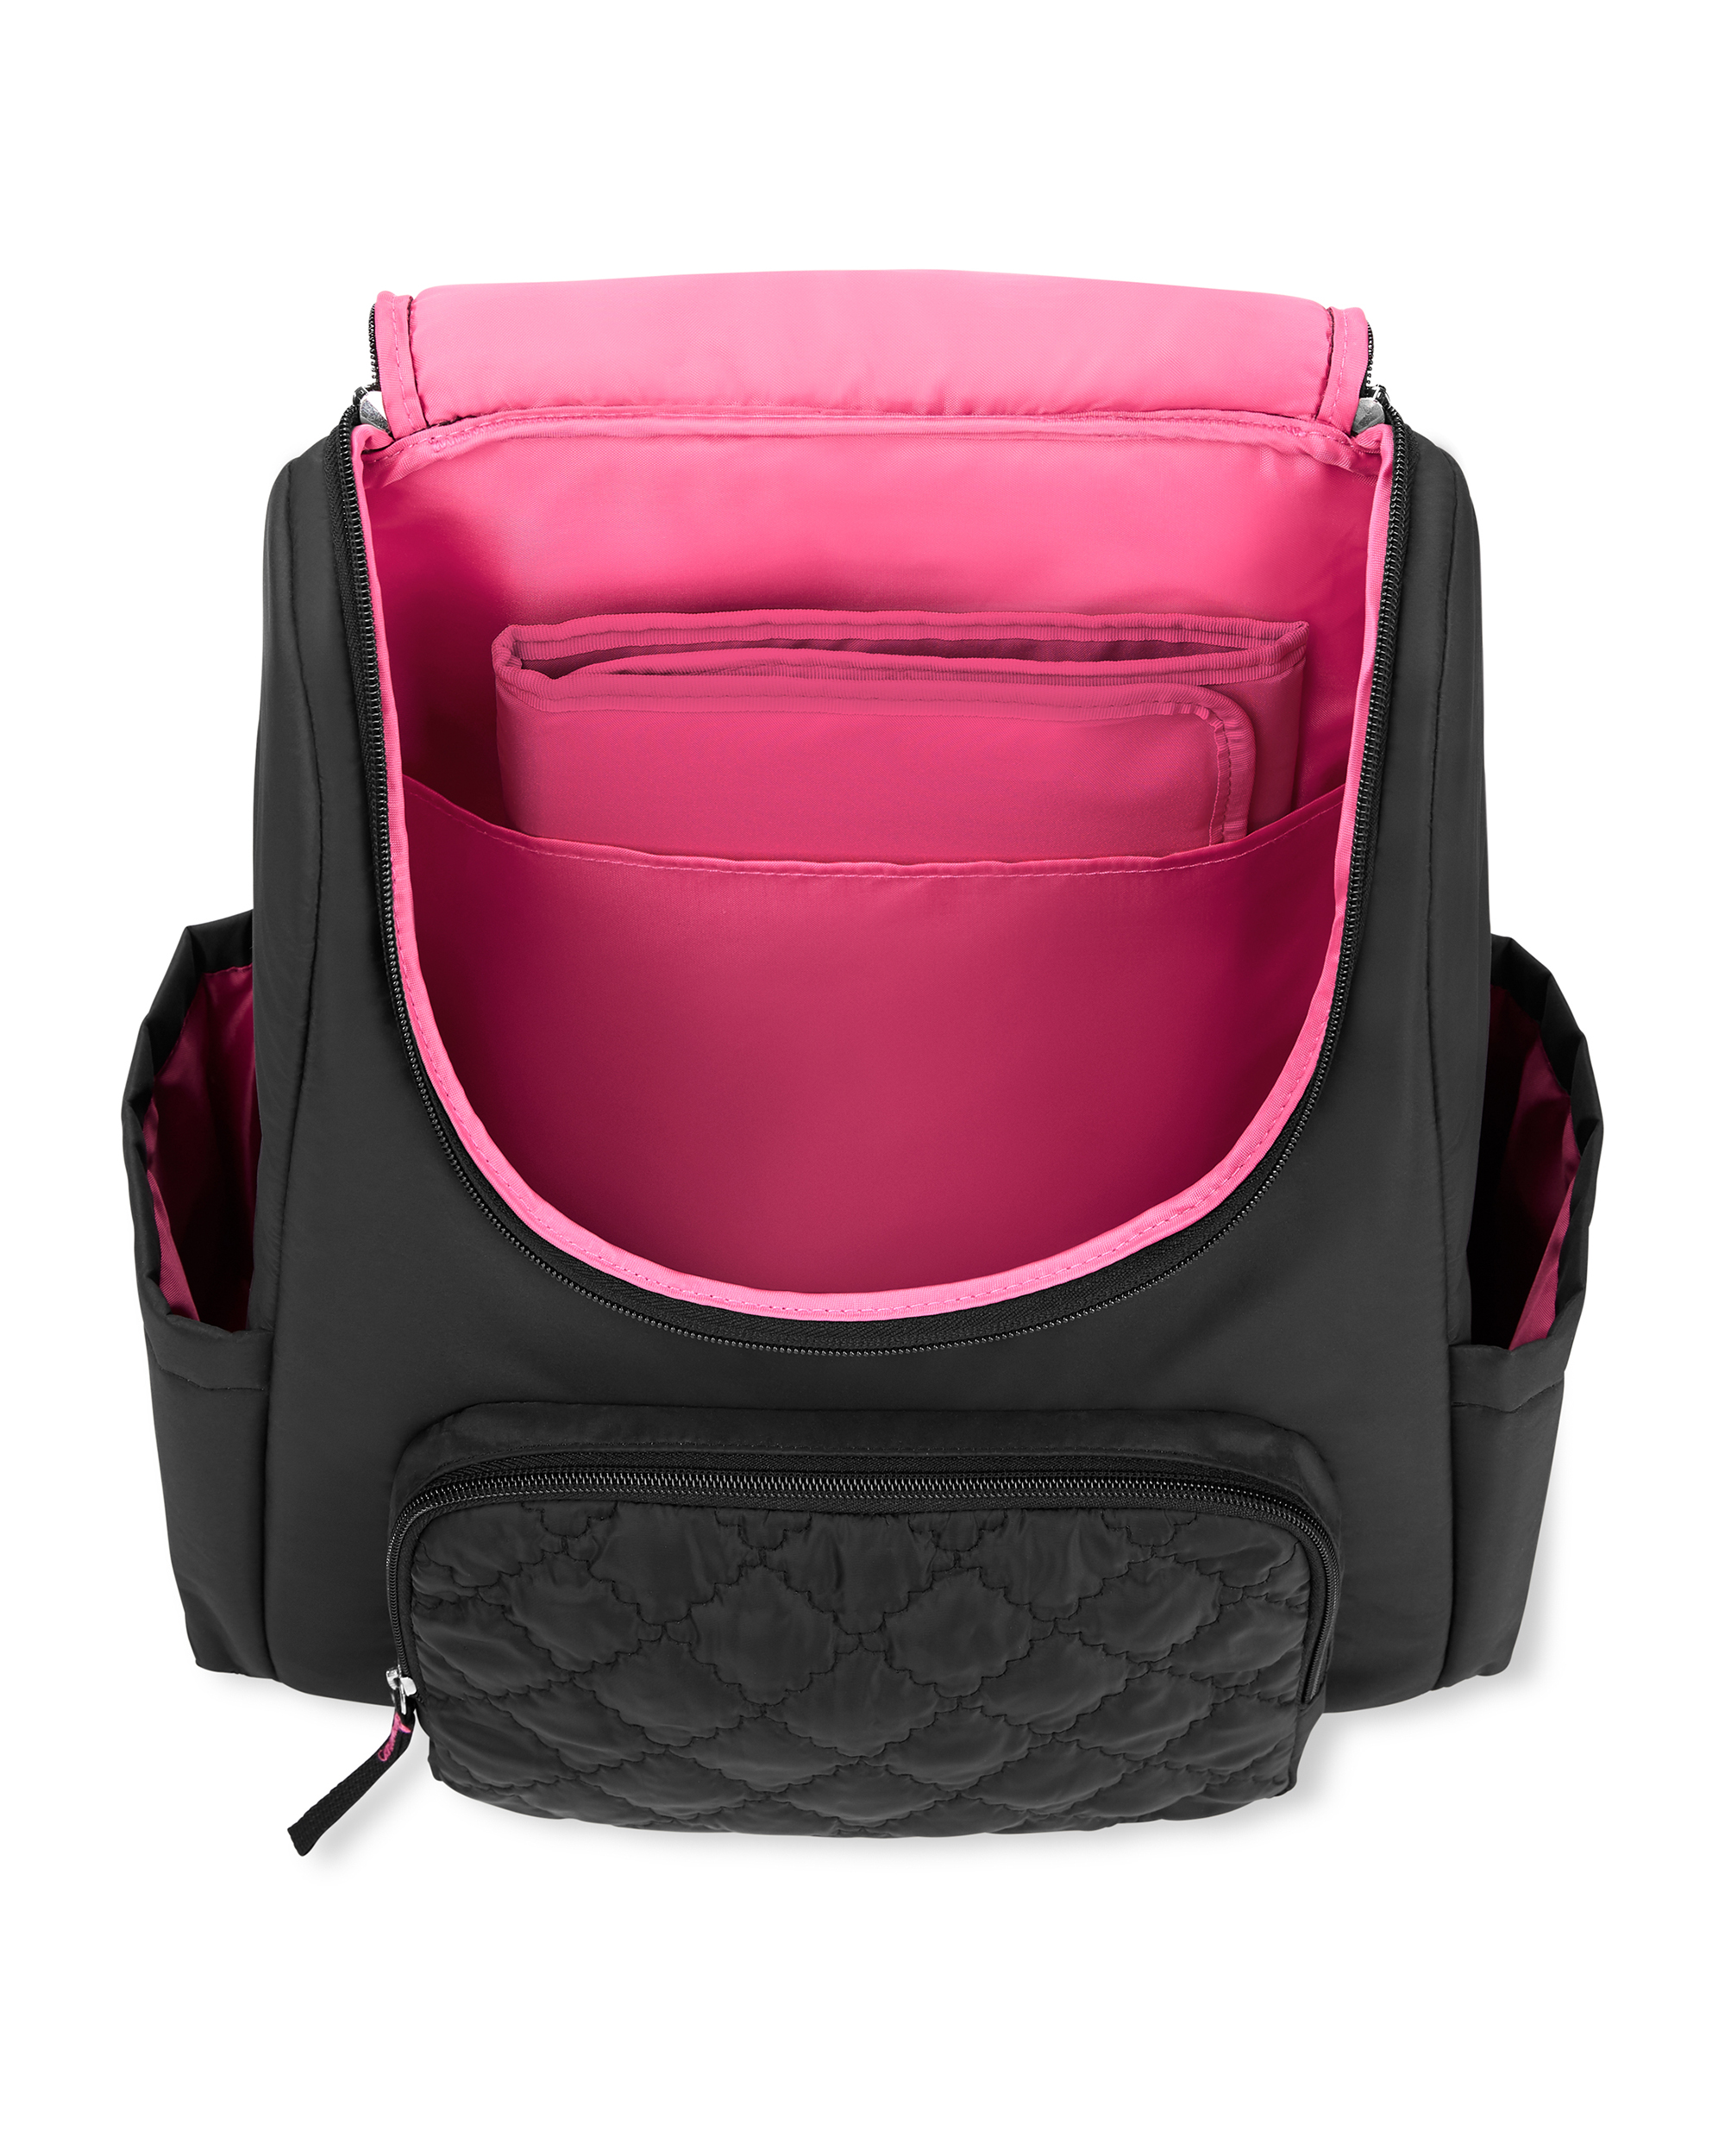 Child of Mine by Carter's Changing Pad Included Backpack Diaper Bag, Black Quilted - image 5 of 12